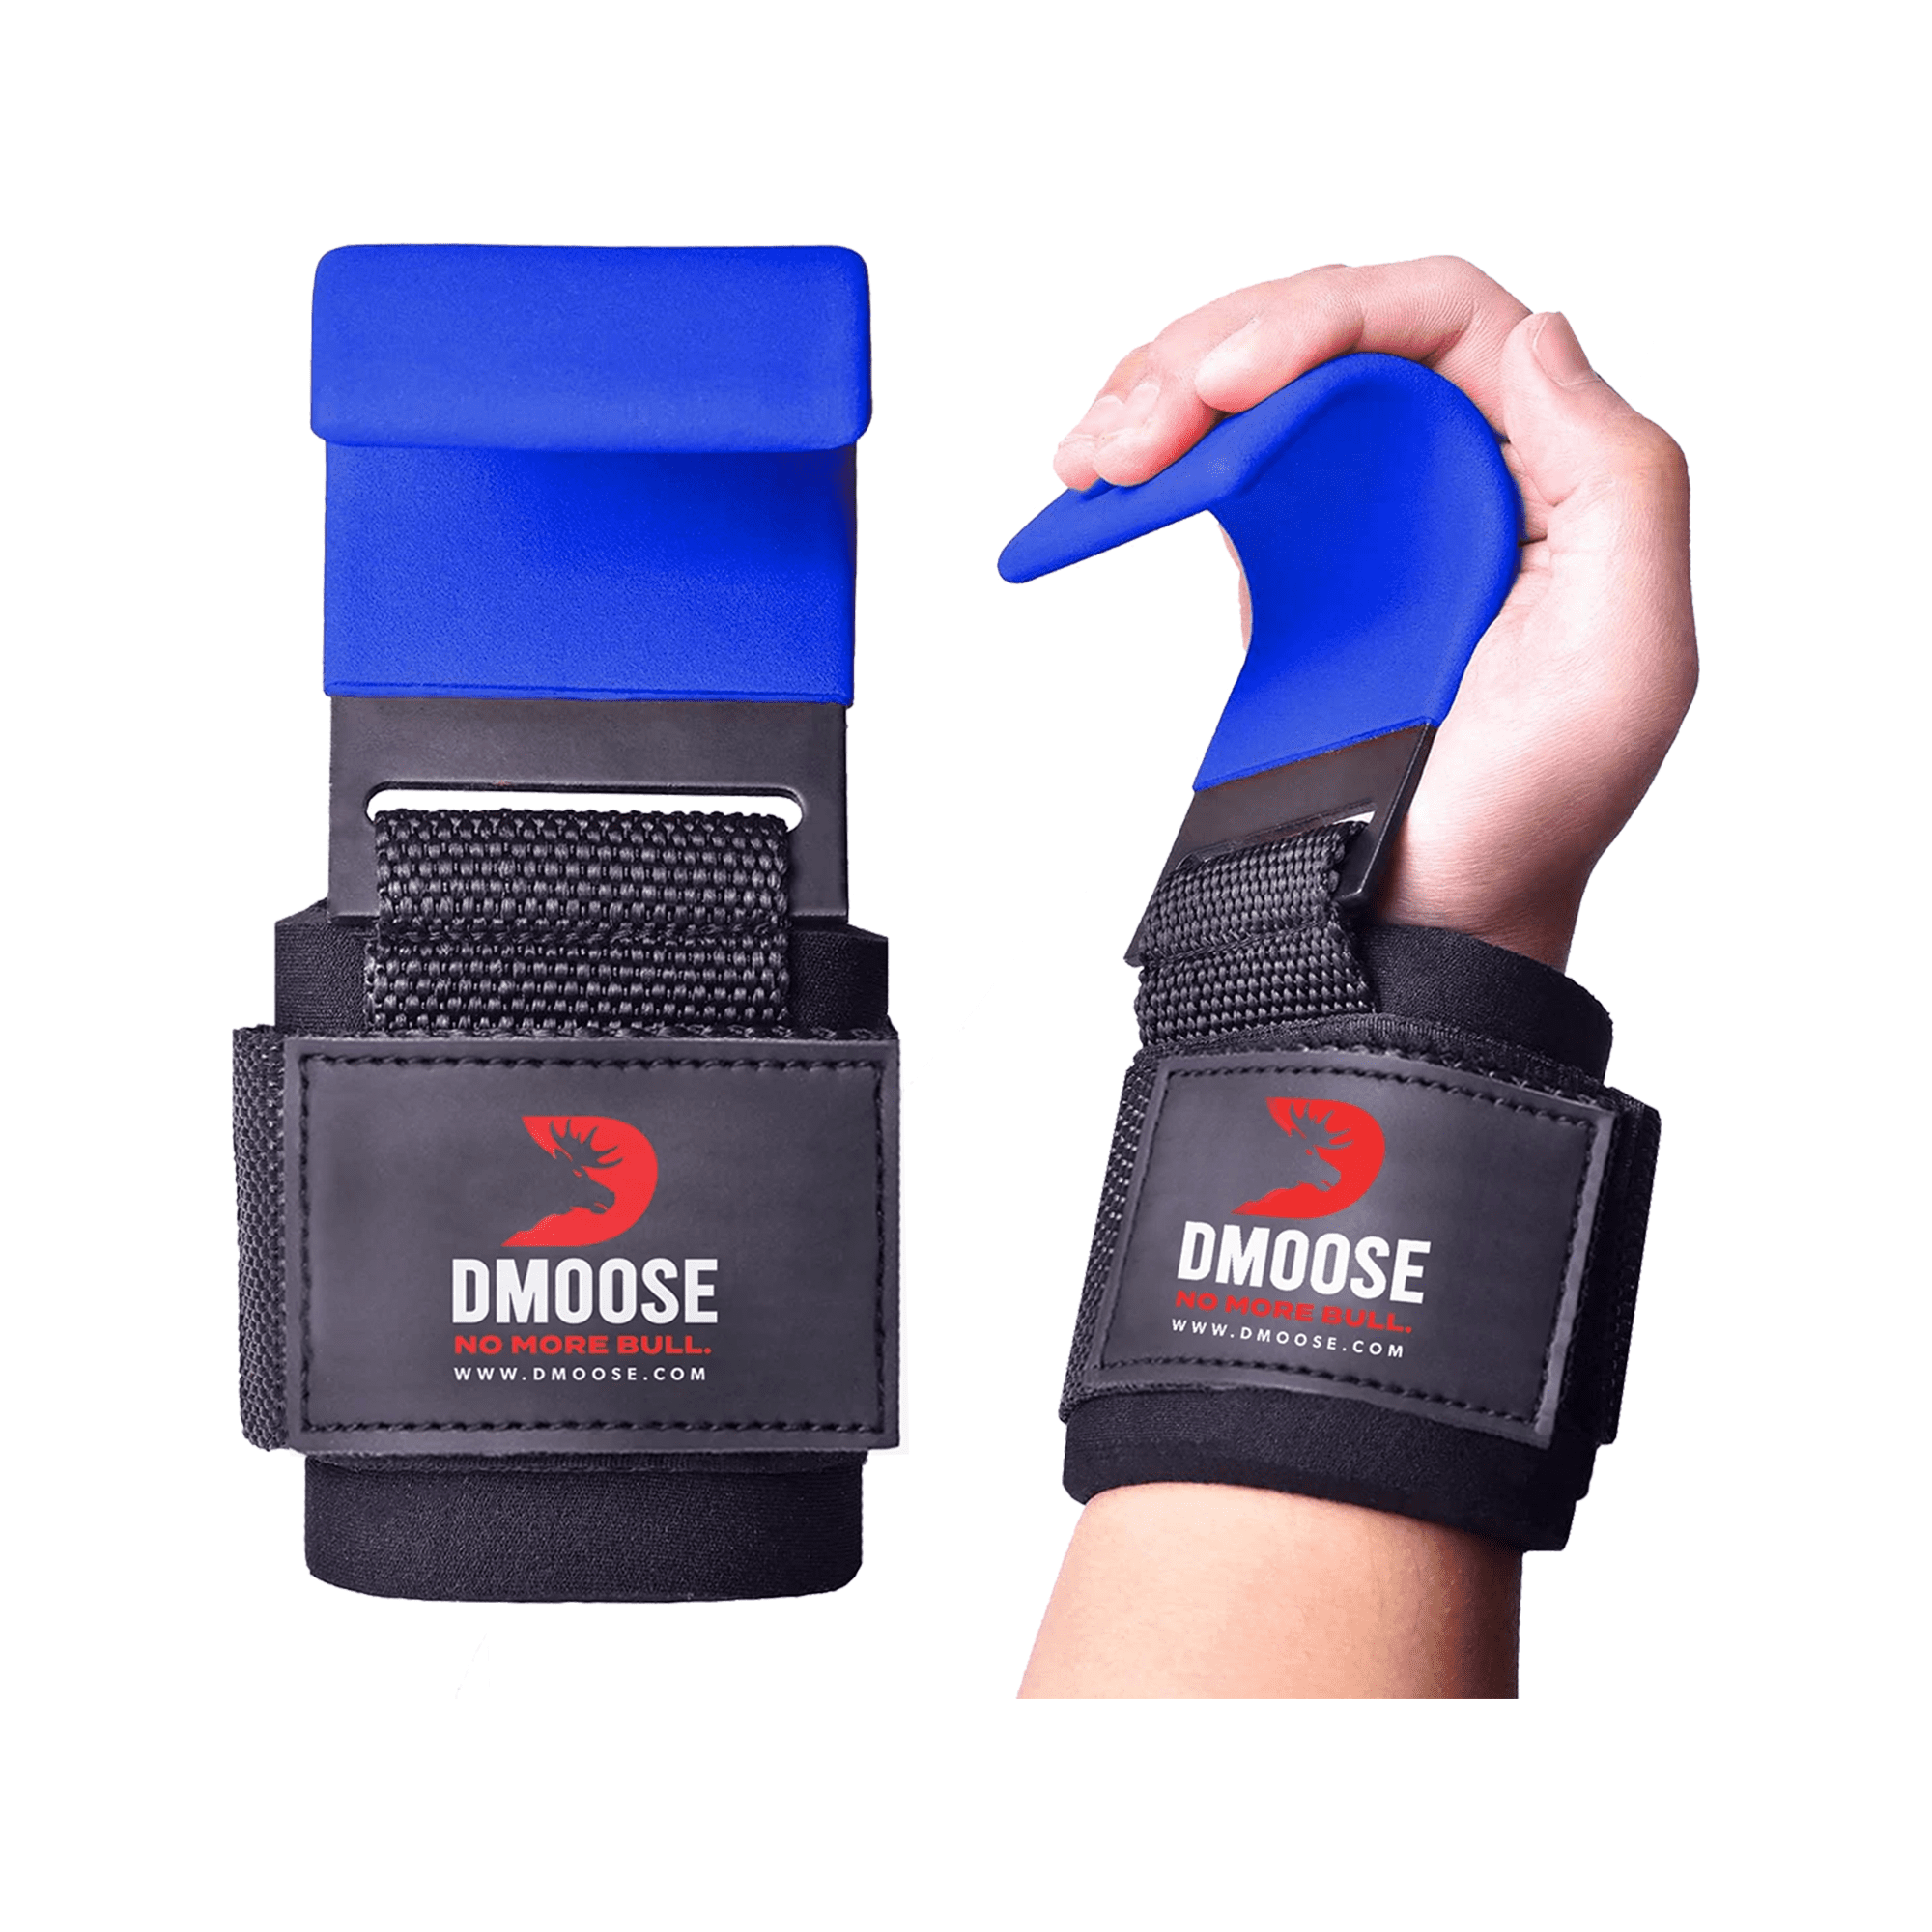 Details about   Wrist Lifting Strap Support With Hook Grips Weight Gym Training Bandage KV 